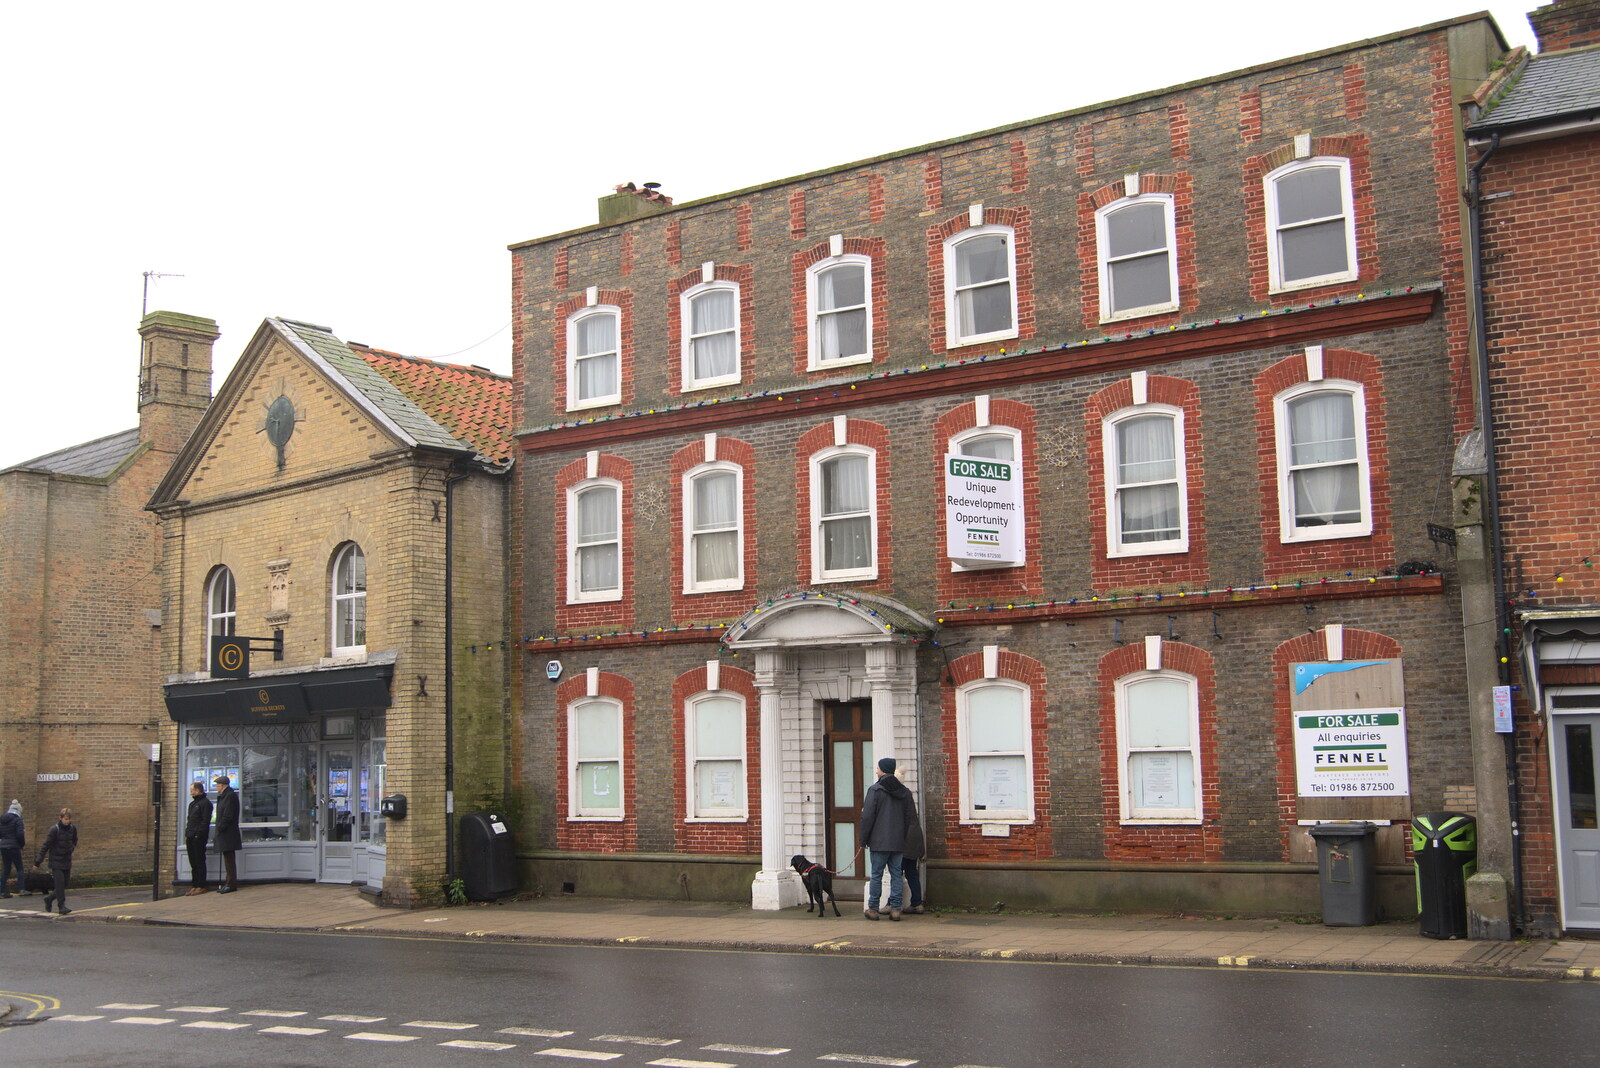 The former bank is still up for sale from A Few Hours at the Seaside, Southwold, Suffolk - 27th December 2021